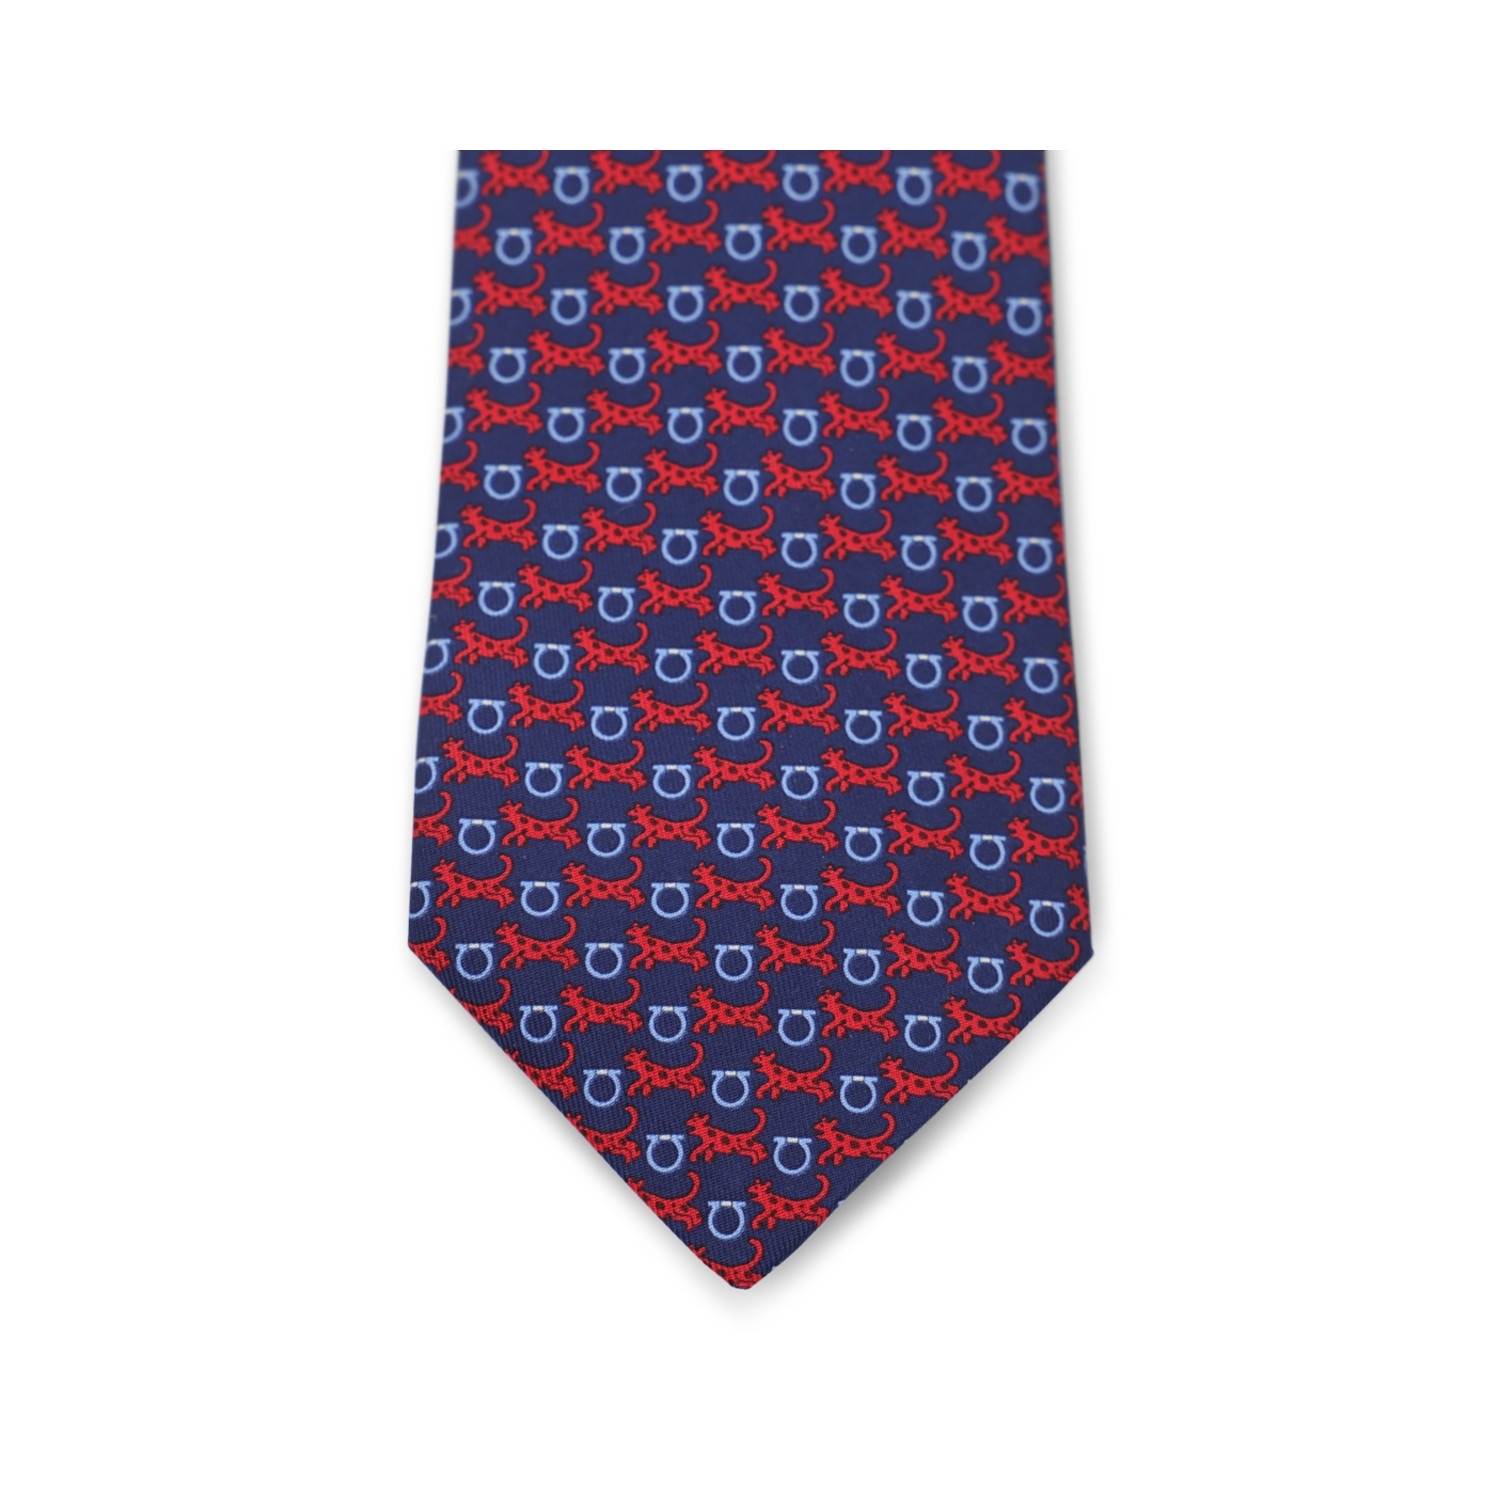 NAVY AND RED SILK TIE - 2